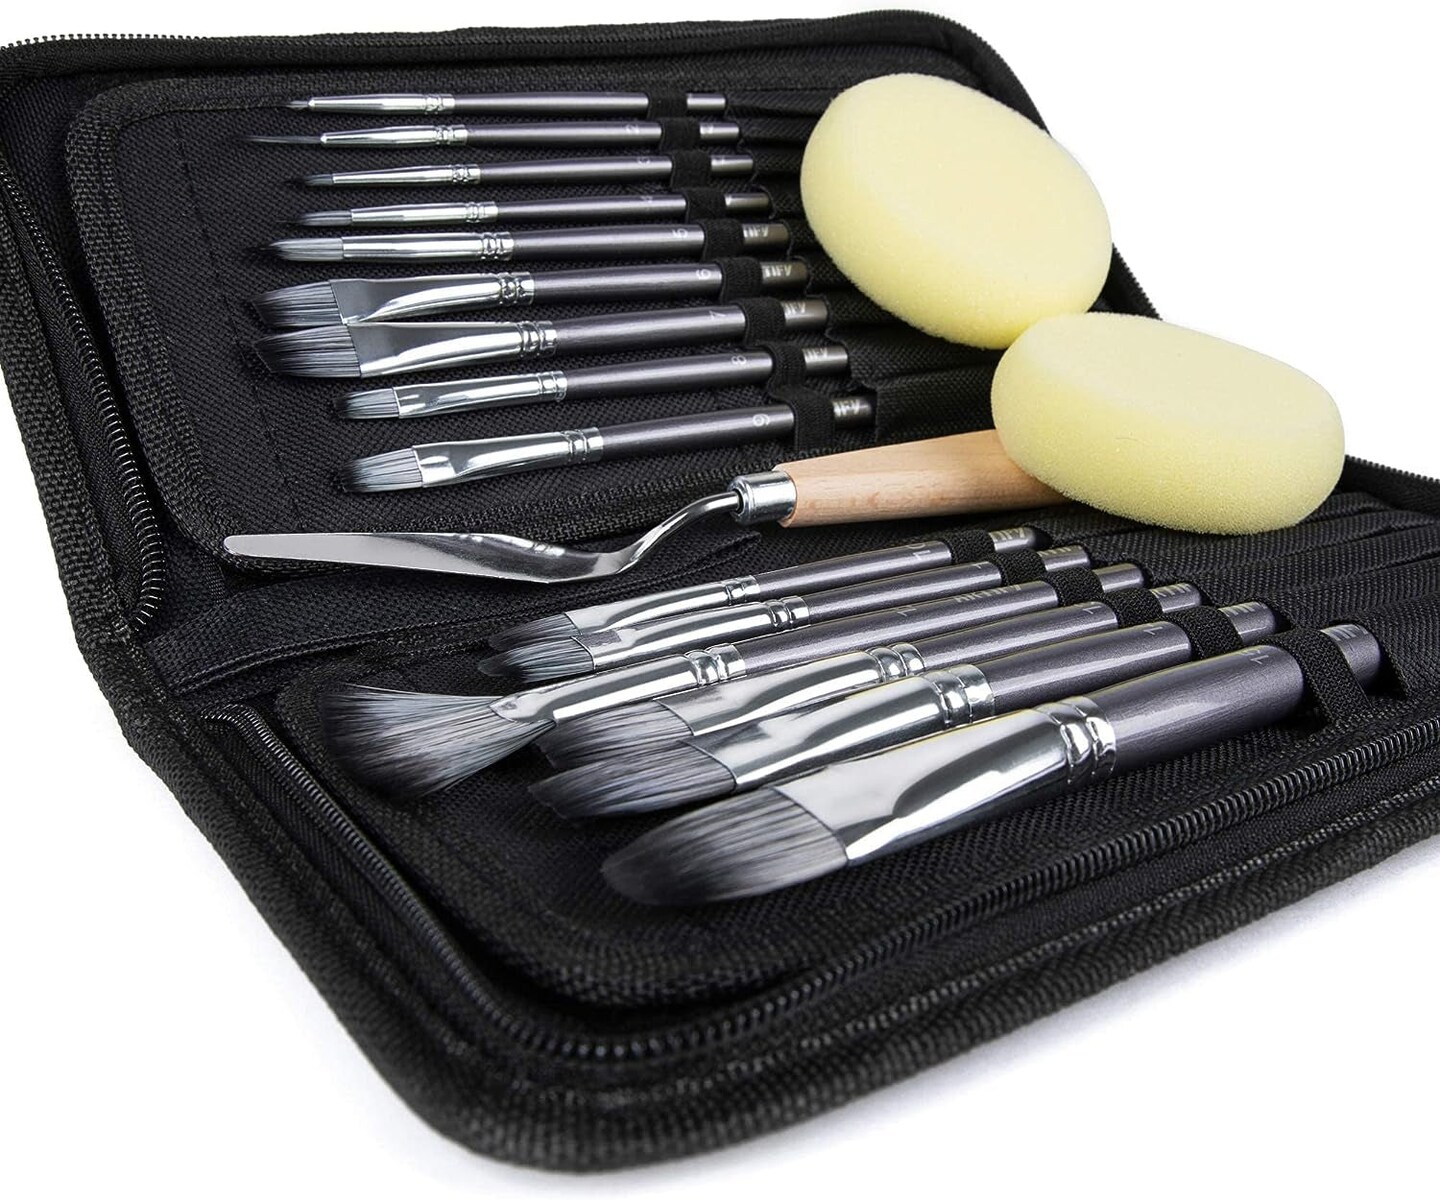 15 Pieces Paint Brush Set, Intermediate Series, Includes Pop-Up Carrying  Case with Palette Knife, for Acrylic, Oil, Watercolor and Gouache Painting